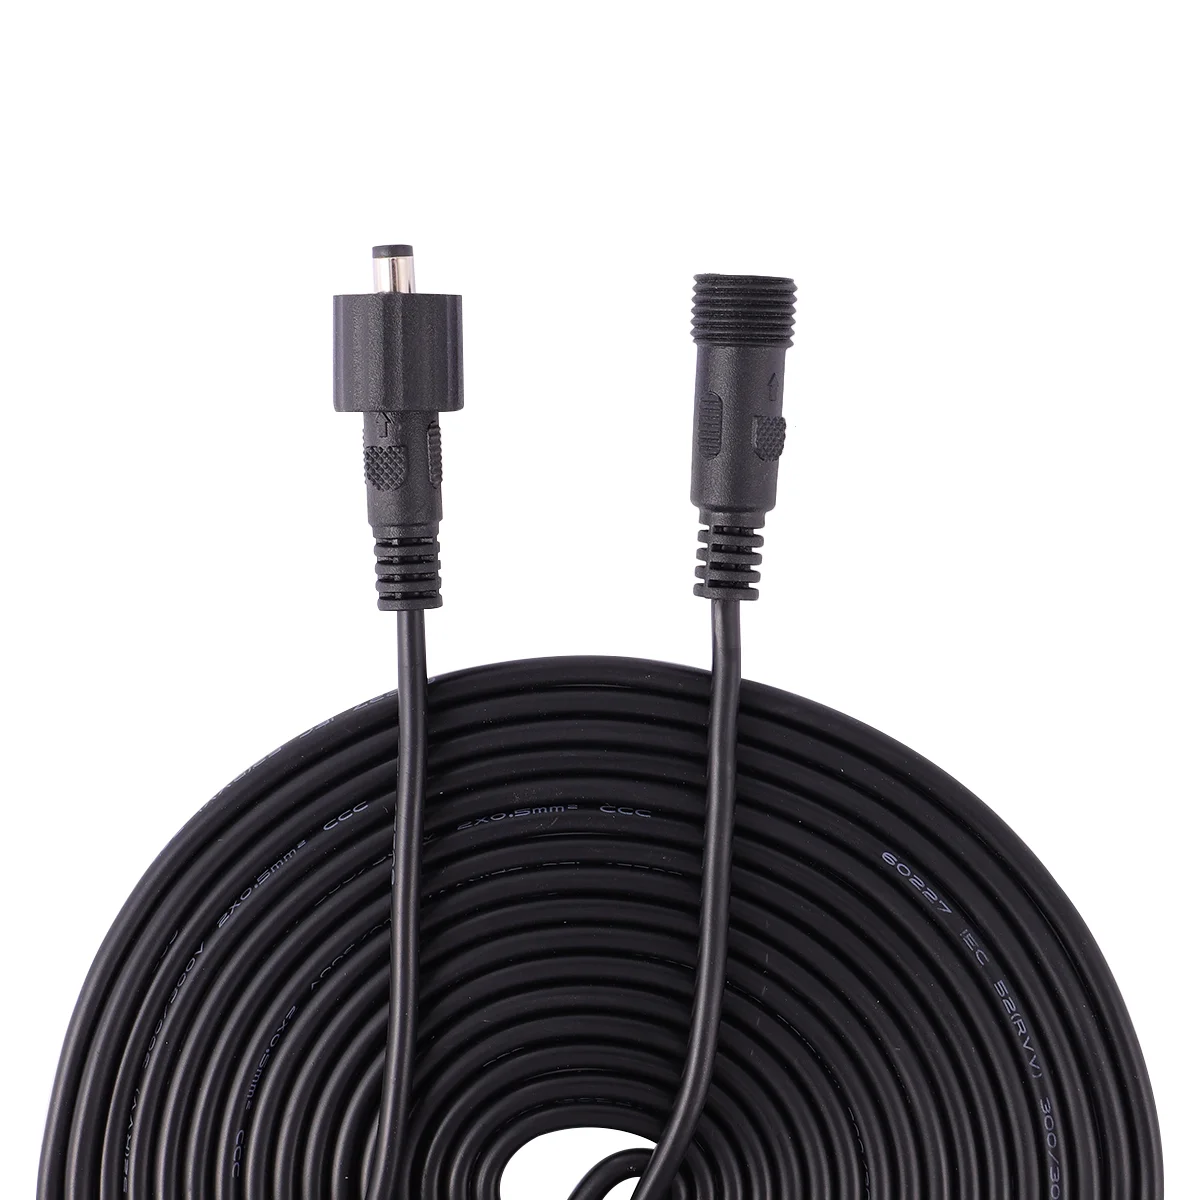 Vorcool 5 Meters Solar Lamp Extension Cable Power Cord - $17.35